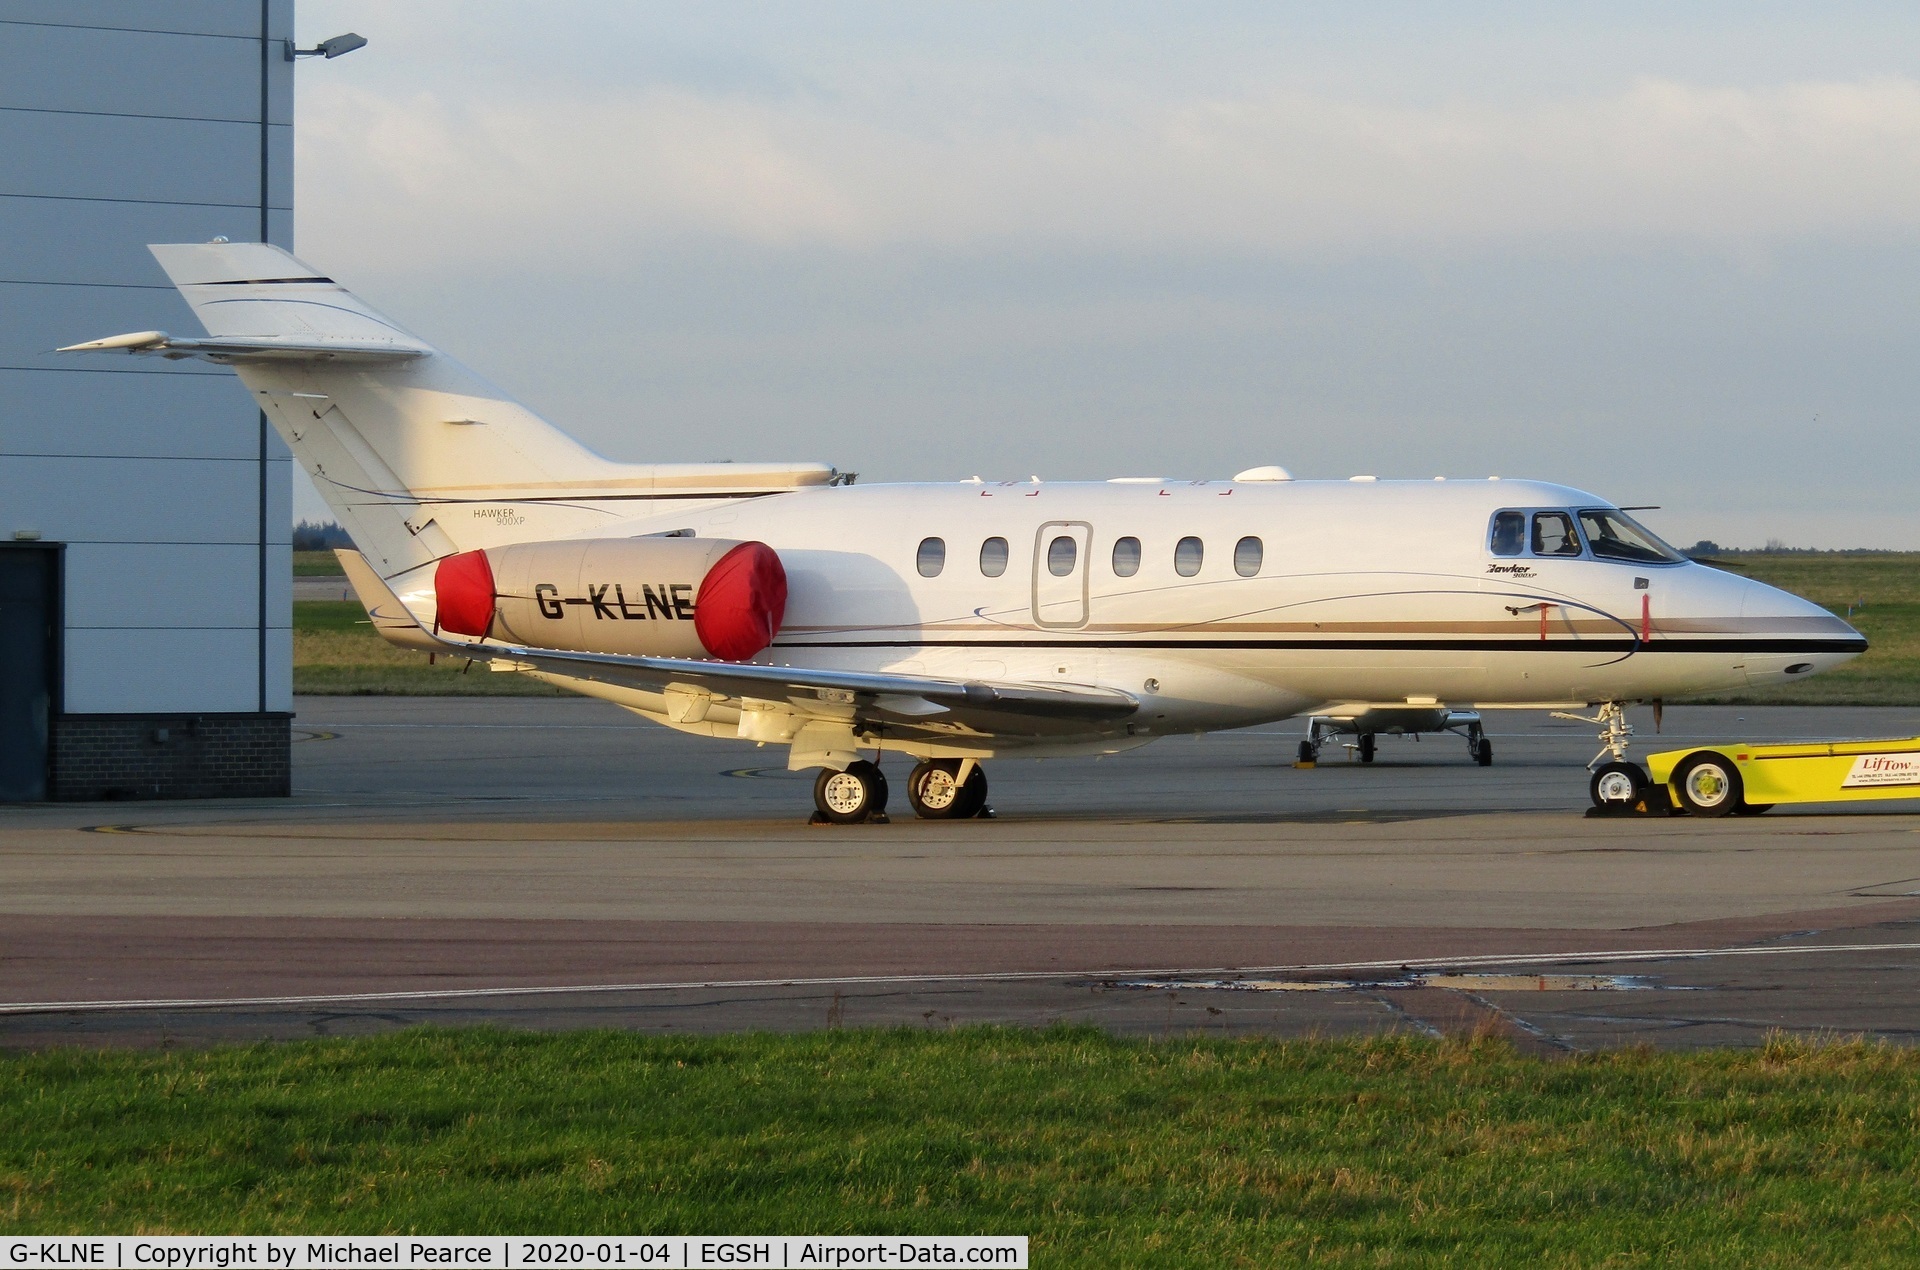 G-KLNE, 2011 Hawker Beechcraft 900XP C/N HA-0186, Parked on the company apron during a sunny winter evening.